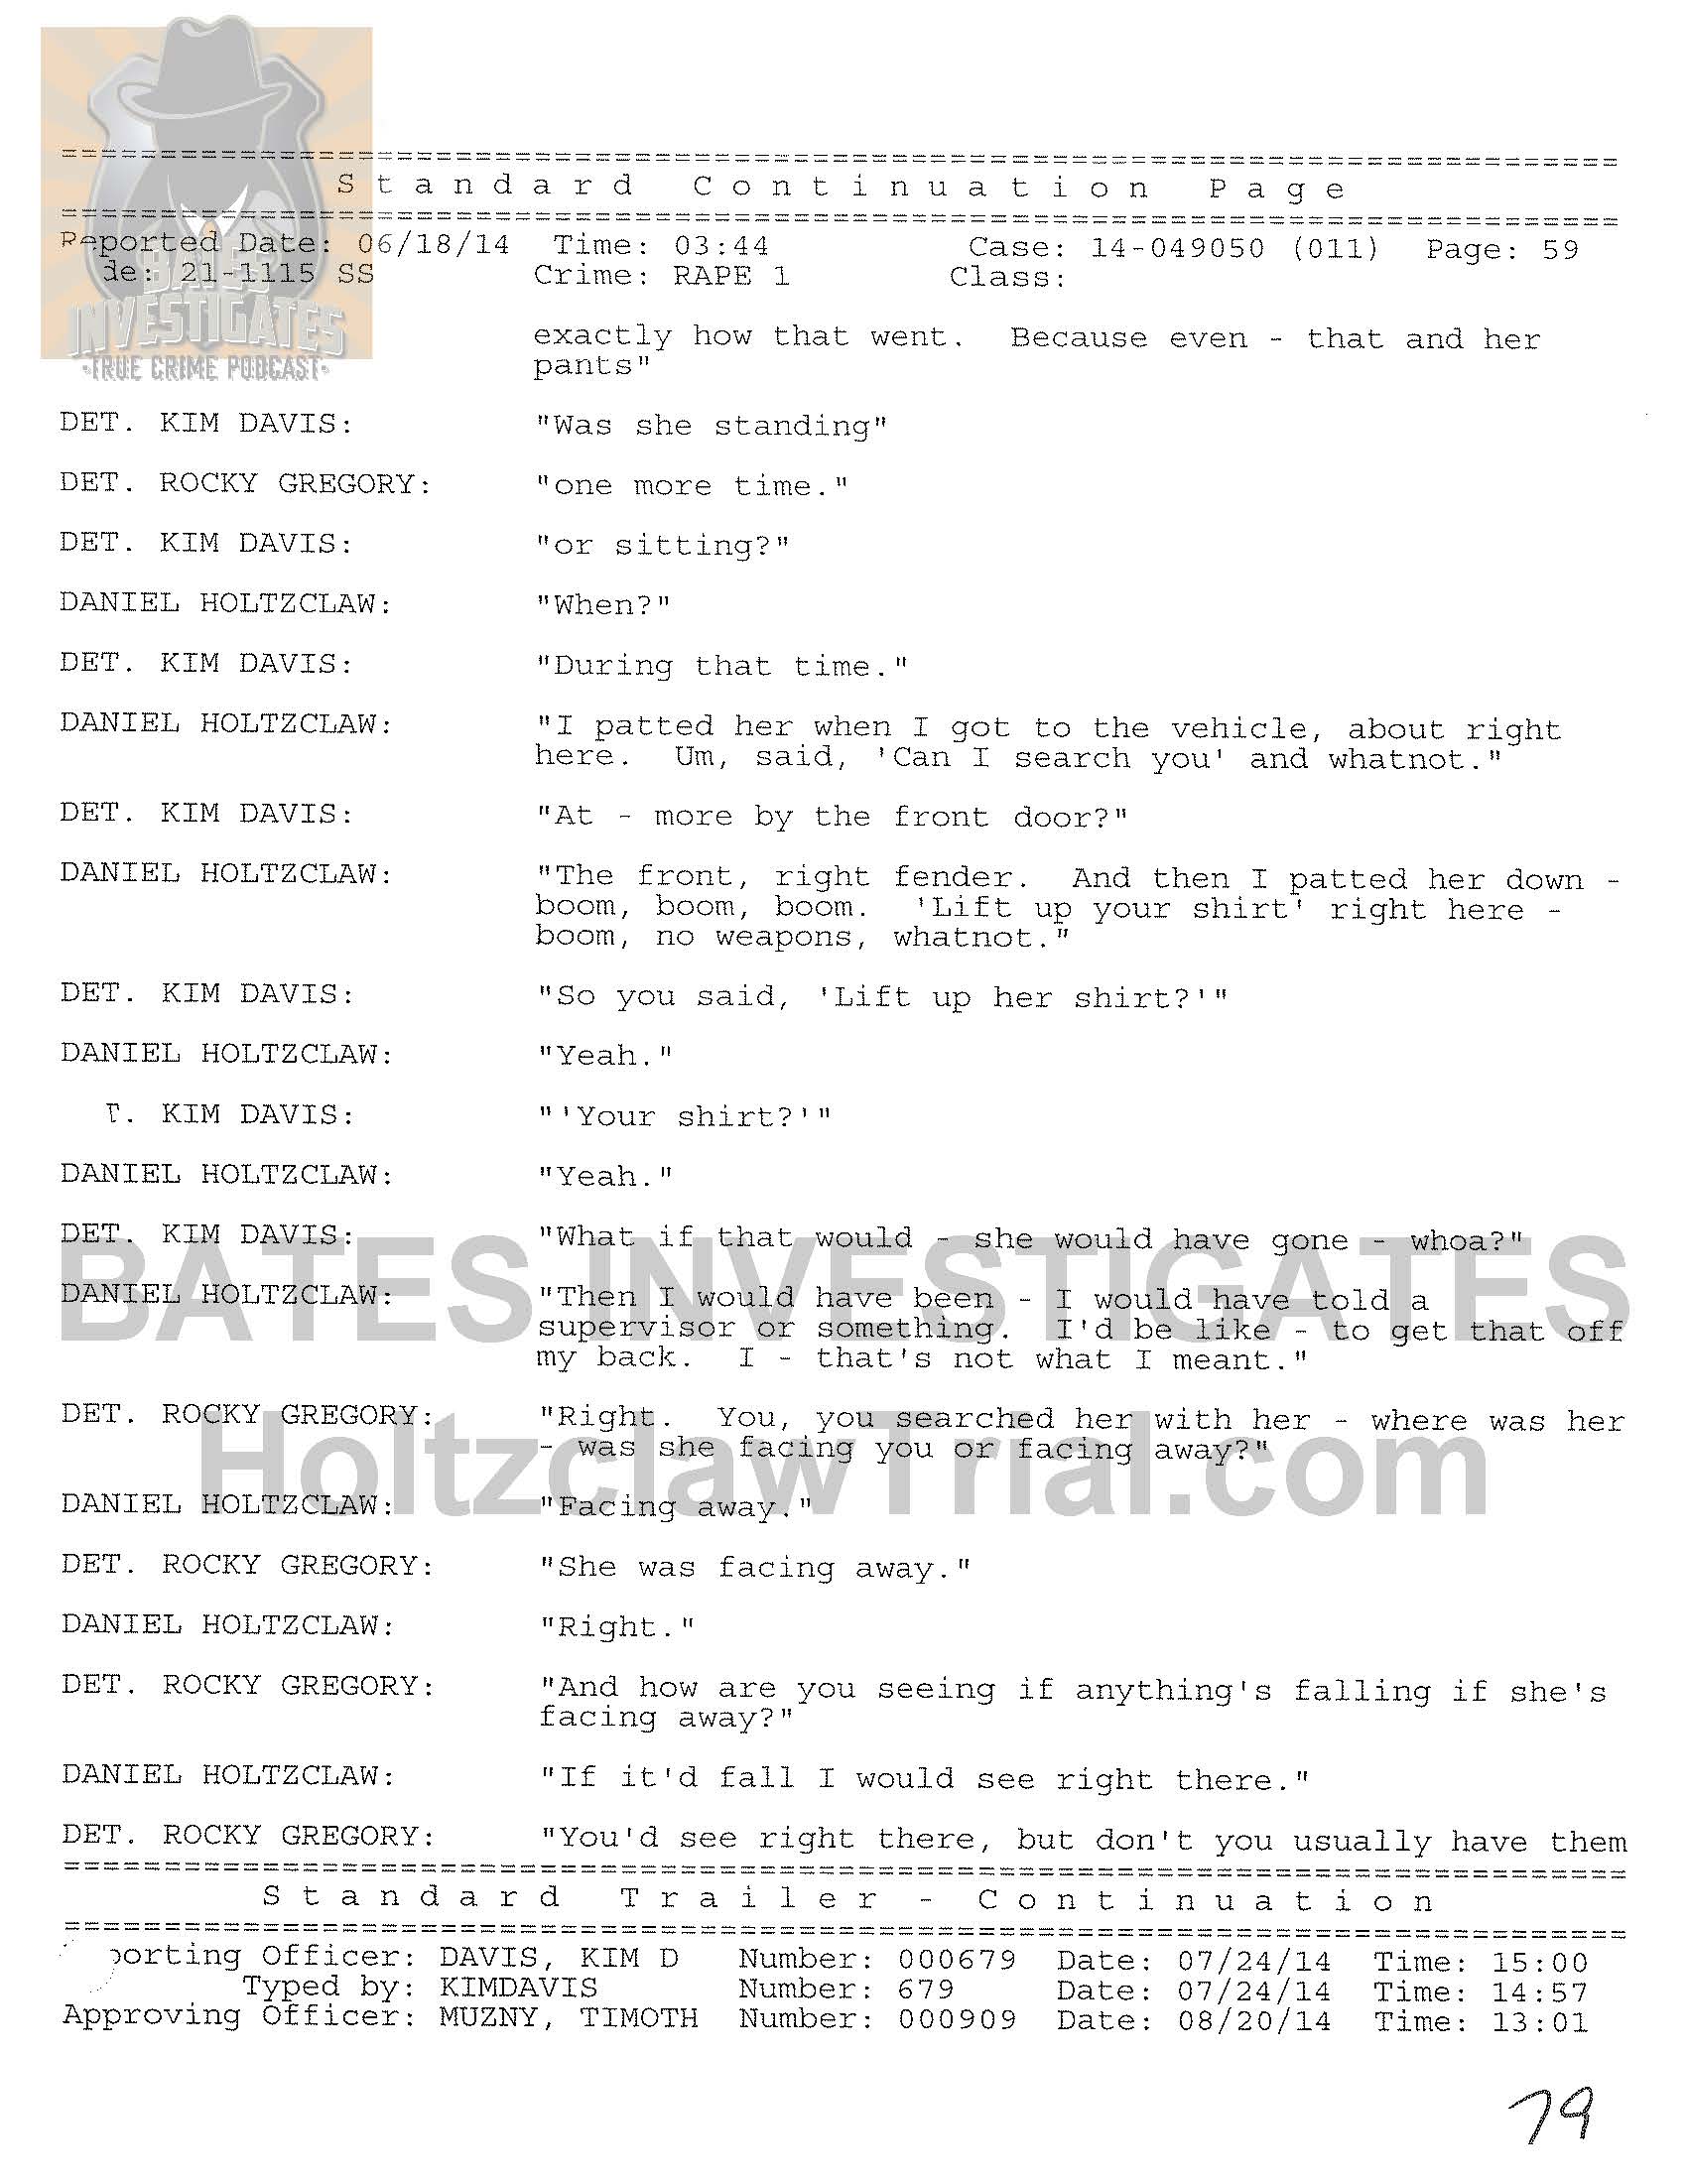 Holtzclaw Interrogation Transcript - Ep02 Redacted_Page_59.jpg